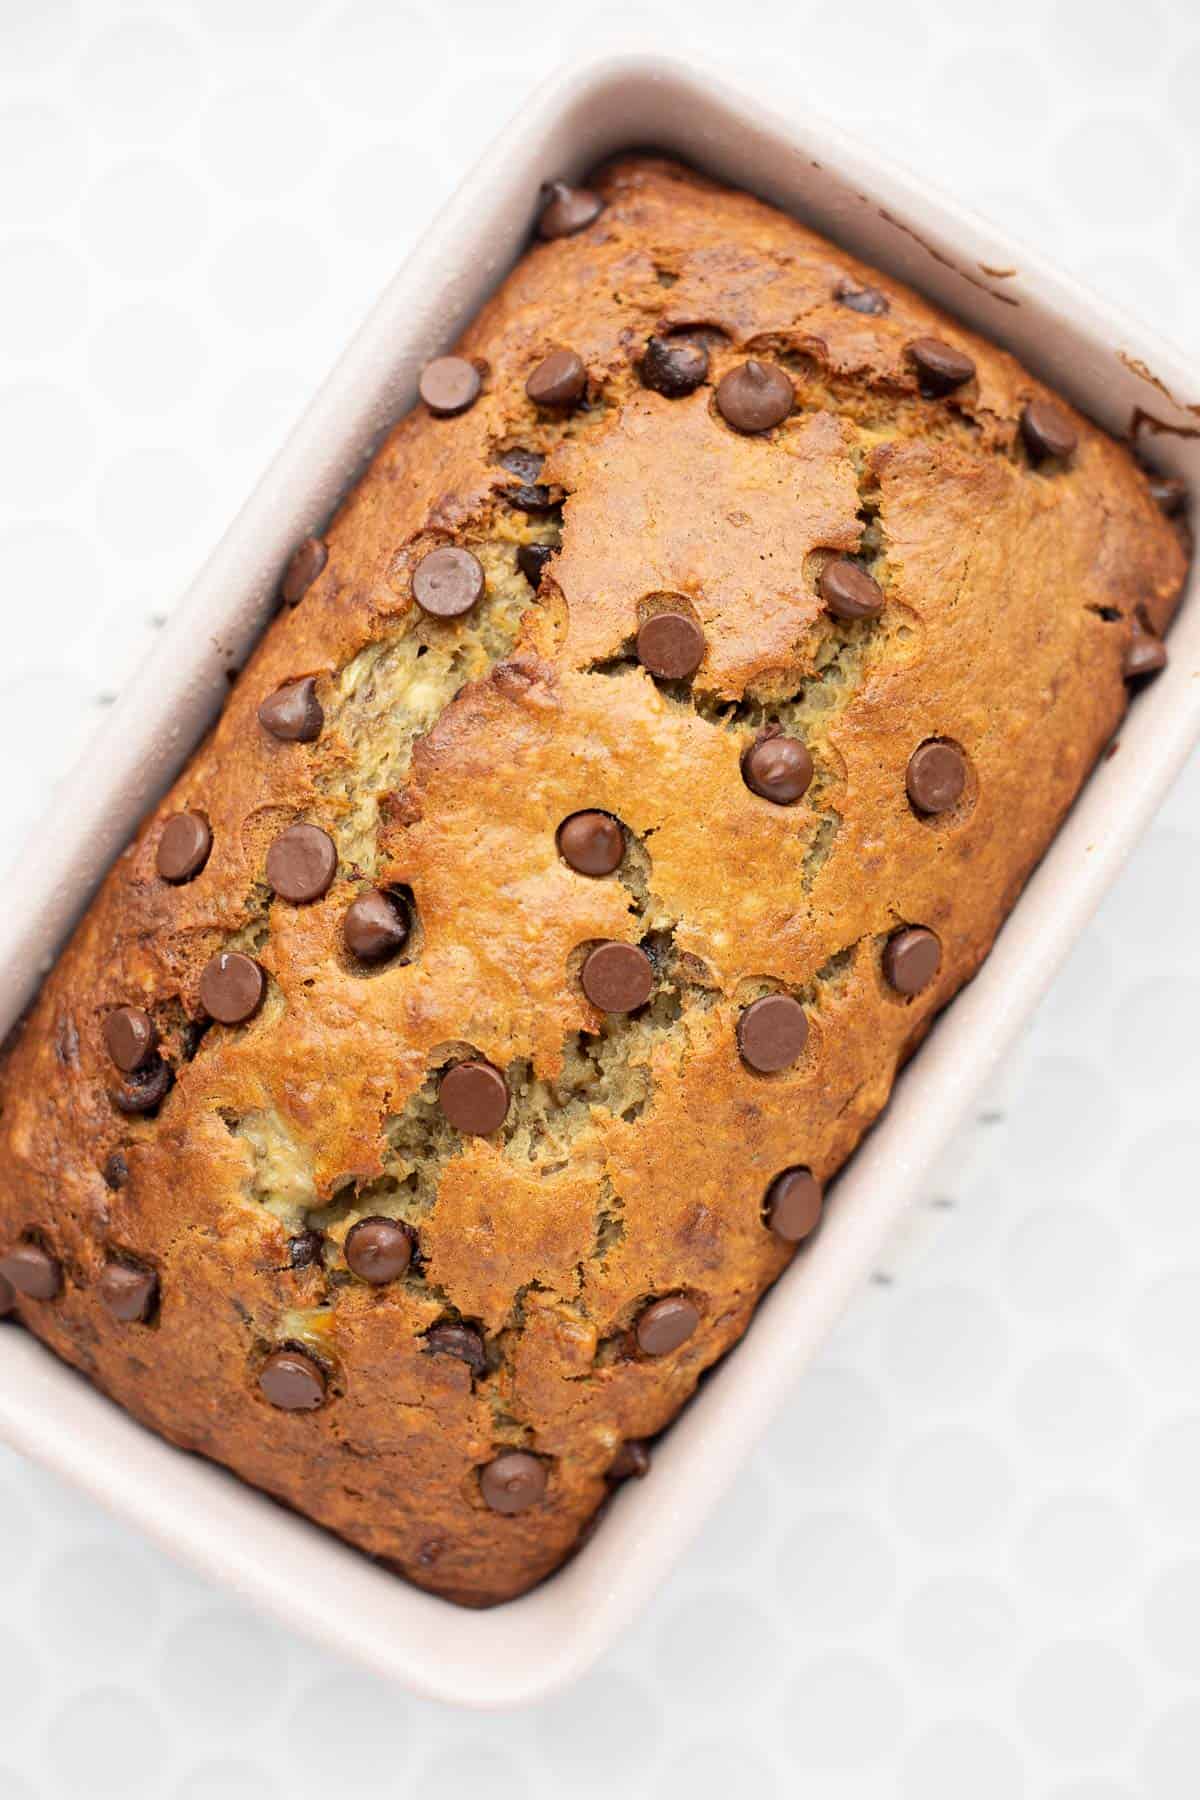 chocolate chip banana bread baked in pink loaf pan.